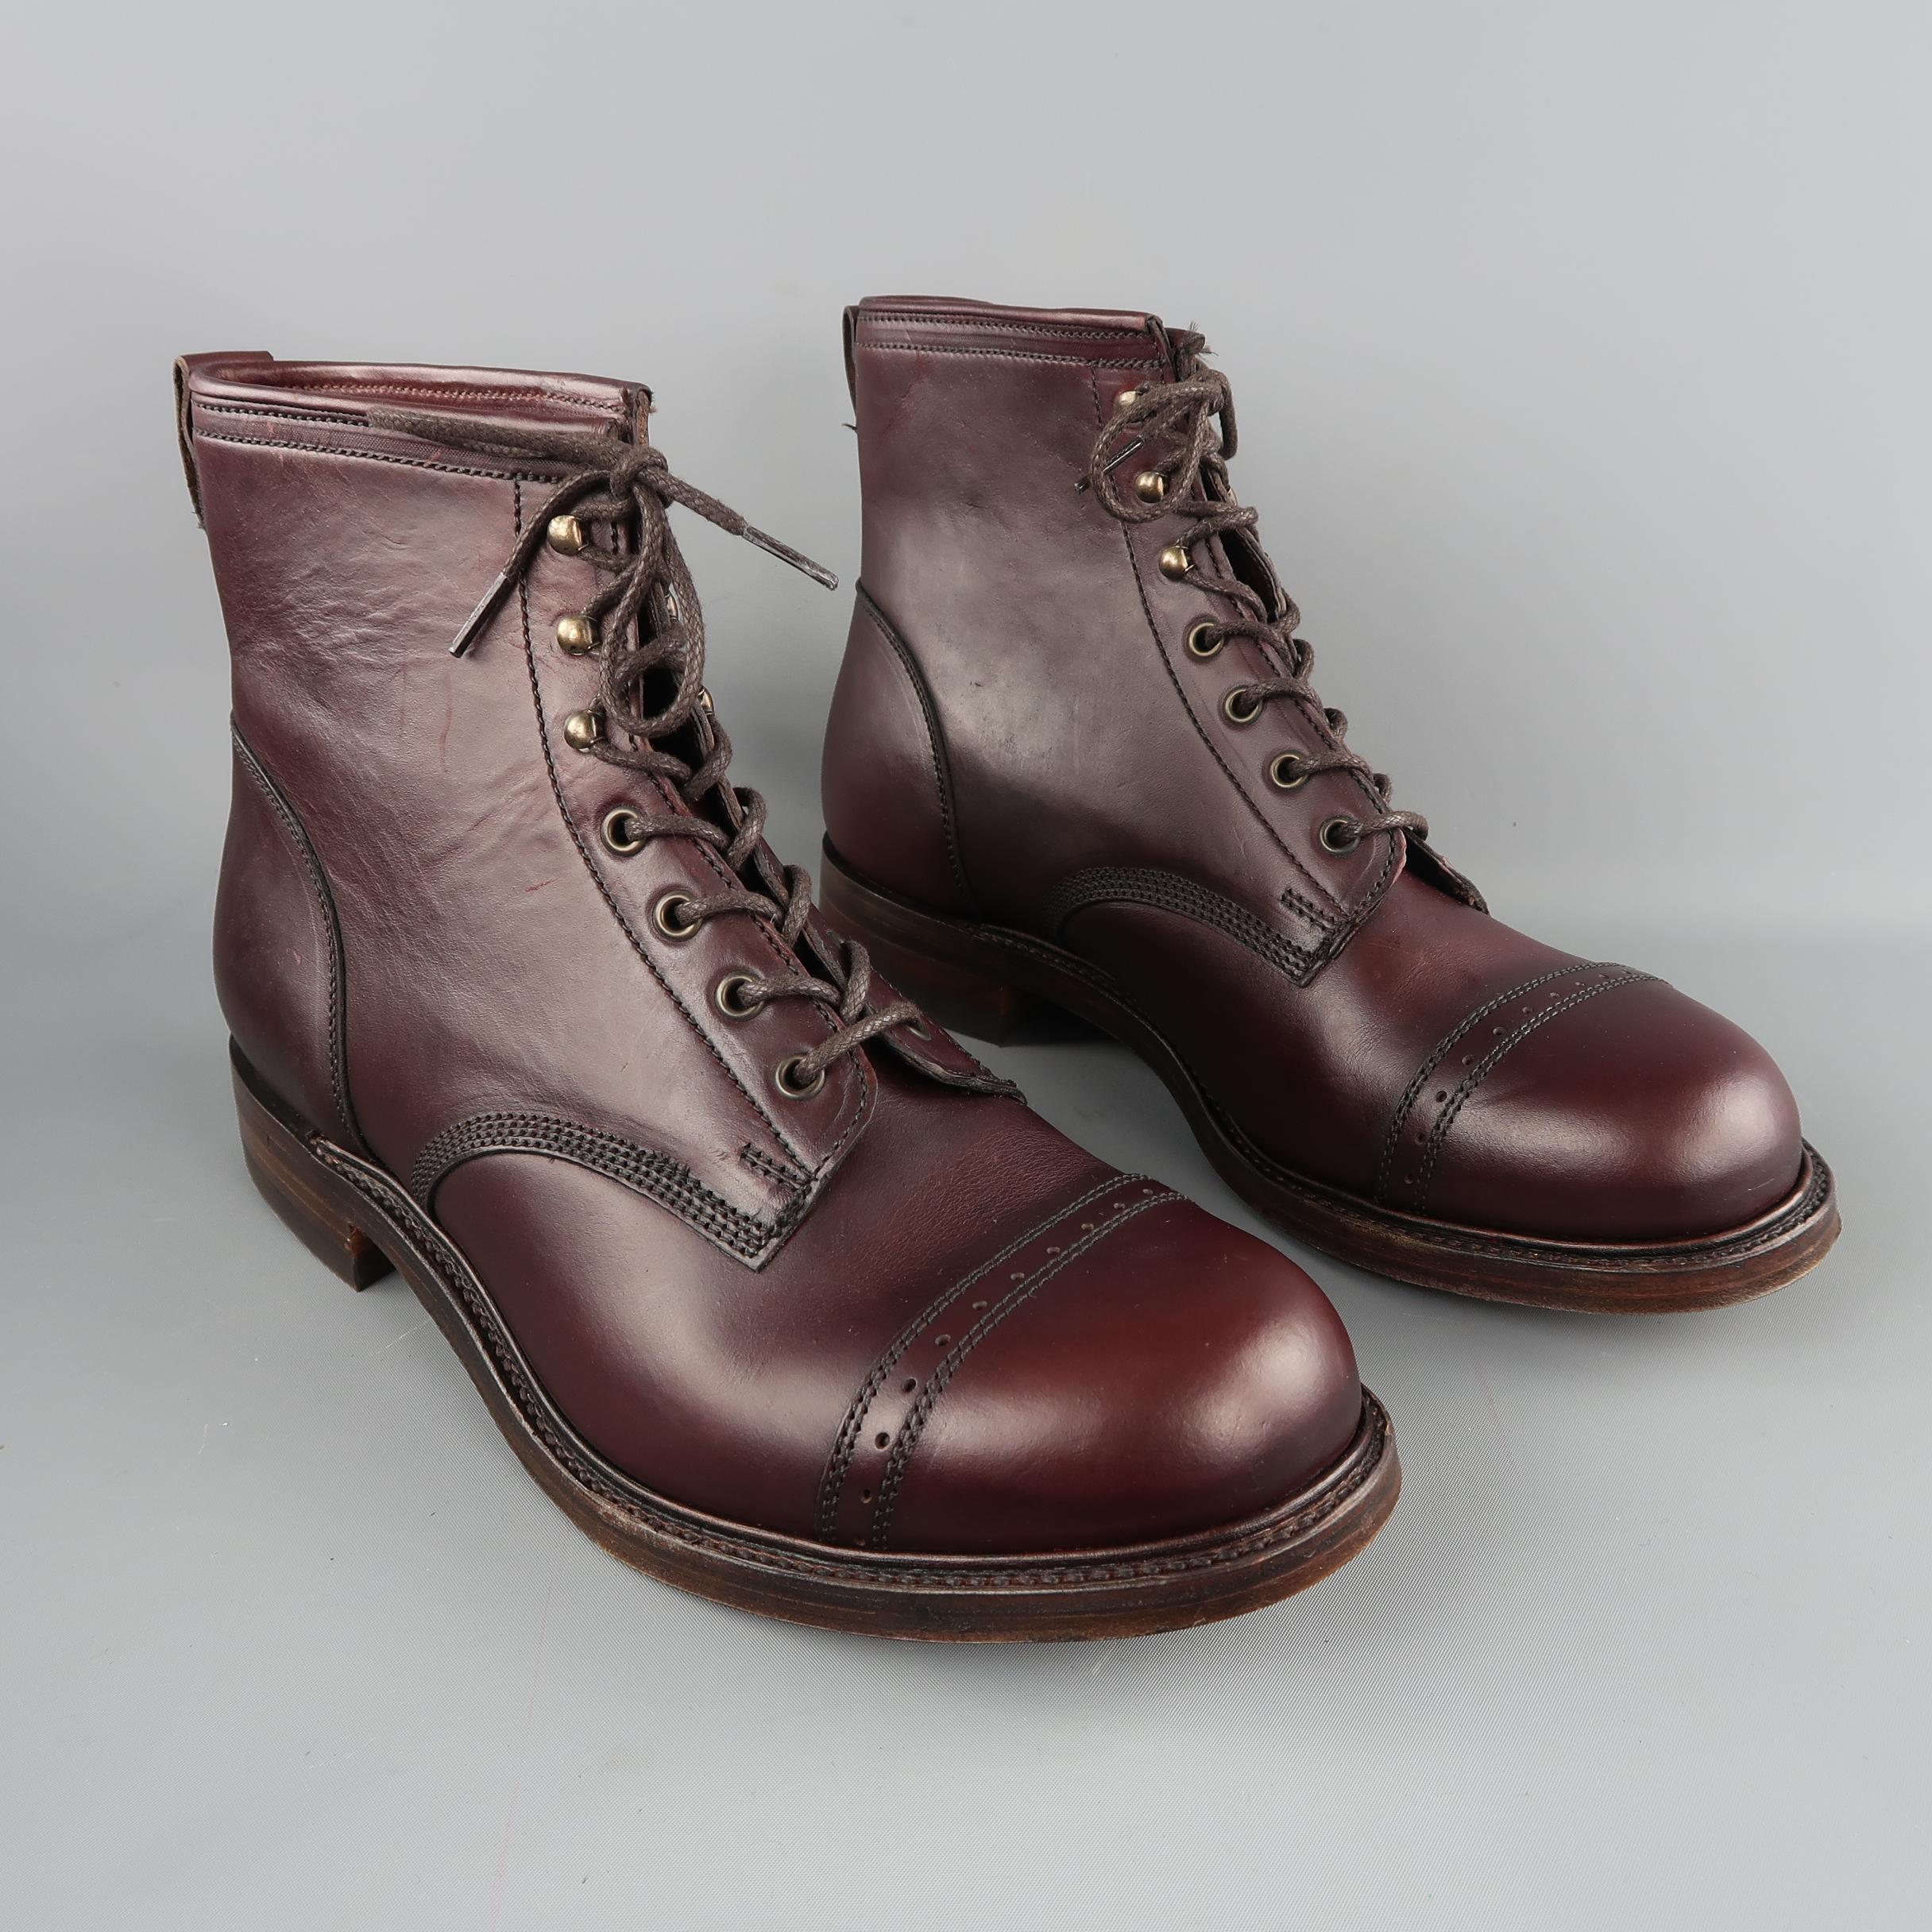 RRL by RALPH LAUREN ankle boots are in burgungy solid leather, with cap toe, lace up.  Made in England.
 
New with box.
Marked: 11.5 UK
 
Measurements:
Outsole: 12.5 x 3  in.